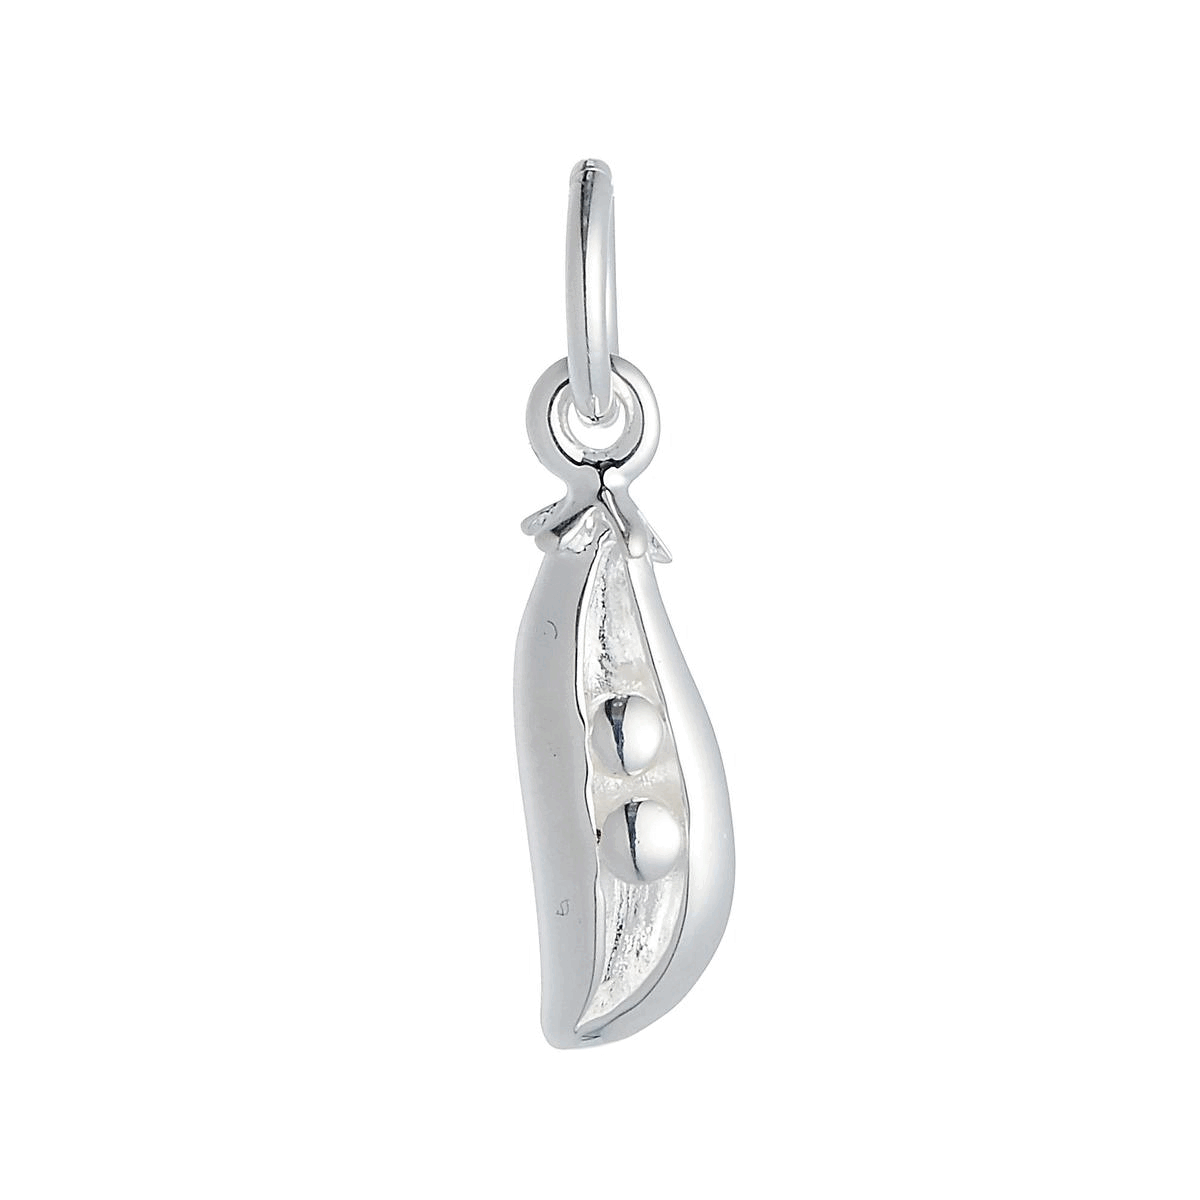 Two Peas In A Pod Twins Sisters Best Friends Sterling Silver Necklace or Bracelet Charm